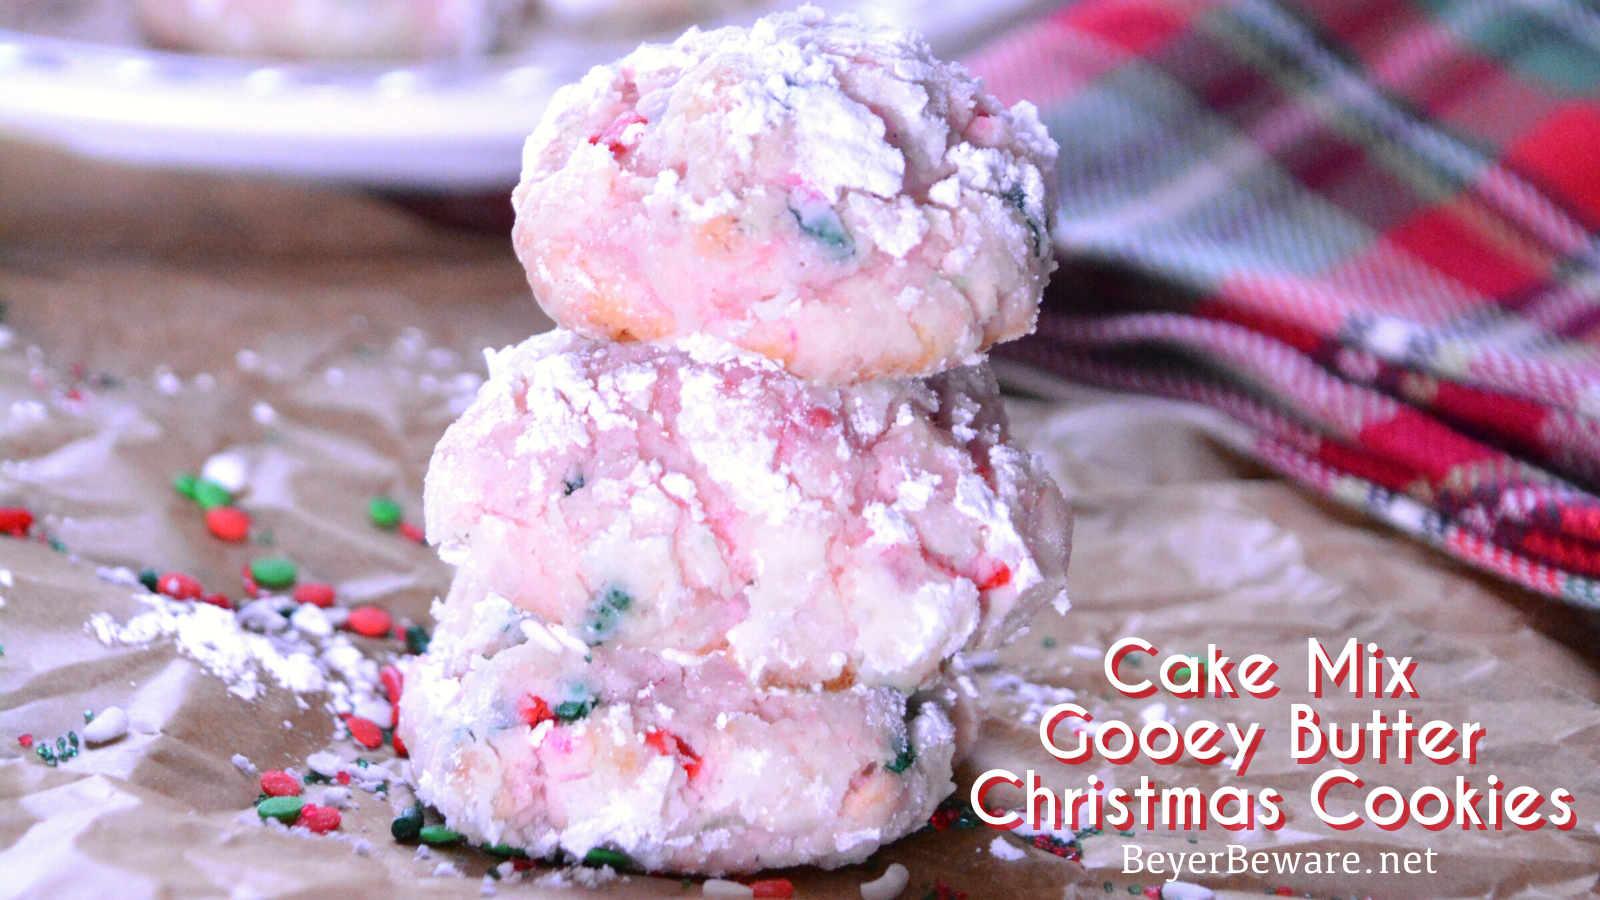 Christmas cake mix gooey butter cookies are a light and fluffy cake mix Christmas cookie made with just for ingredients.